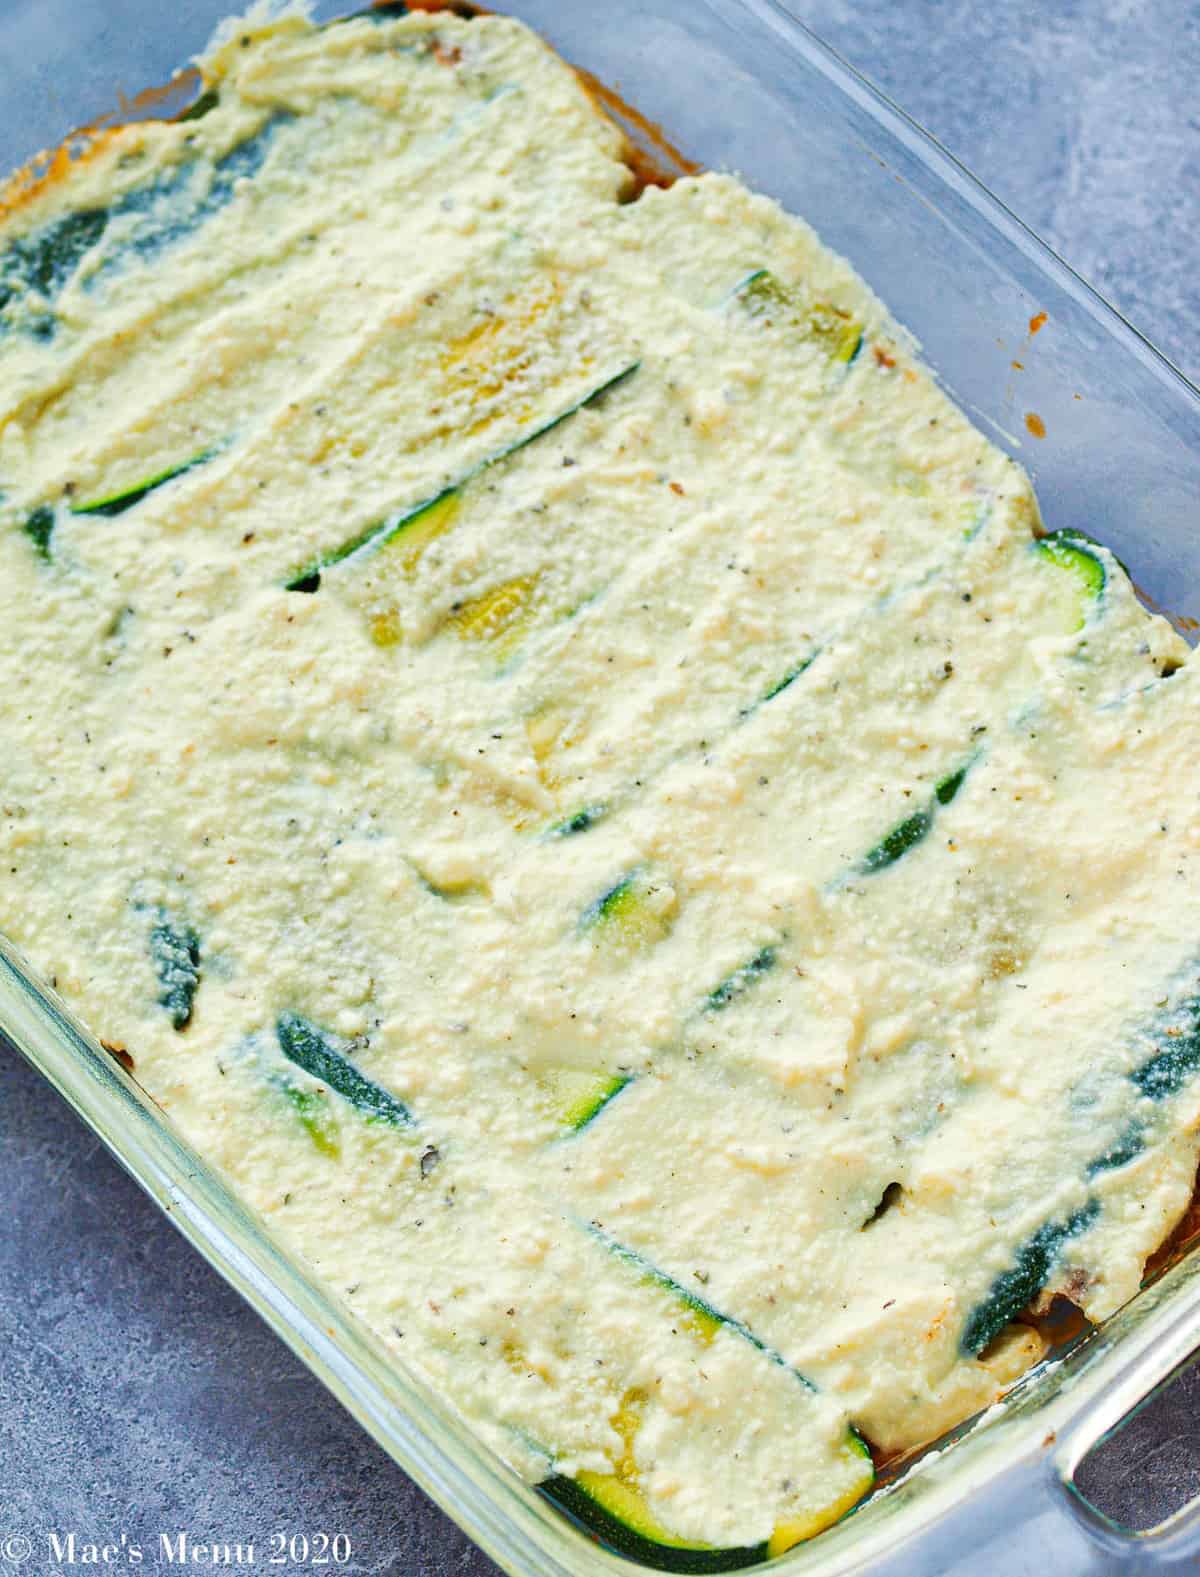 The third layer of zucchini lasagna: ricotta cheese mixture on top of the zucchini